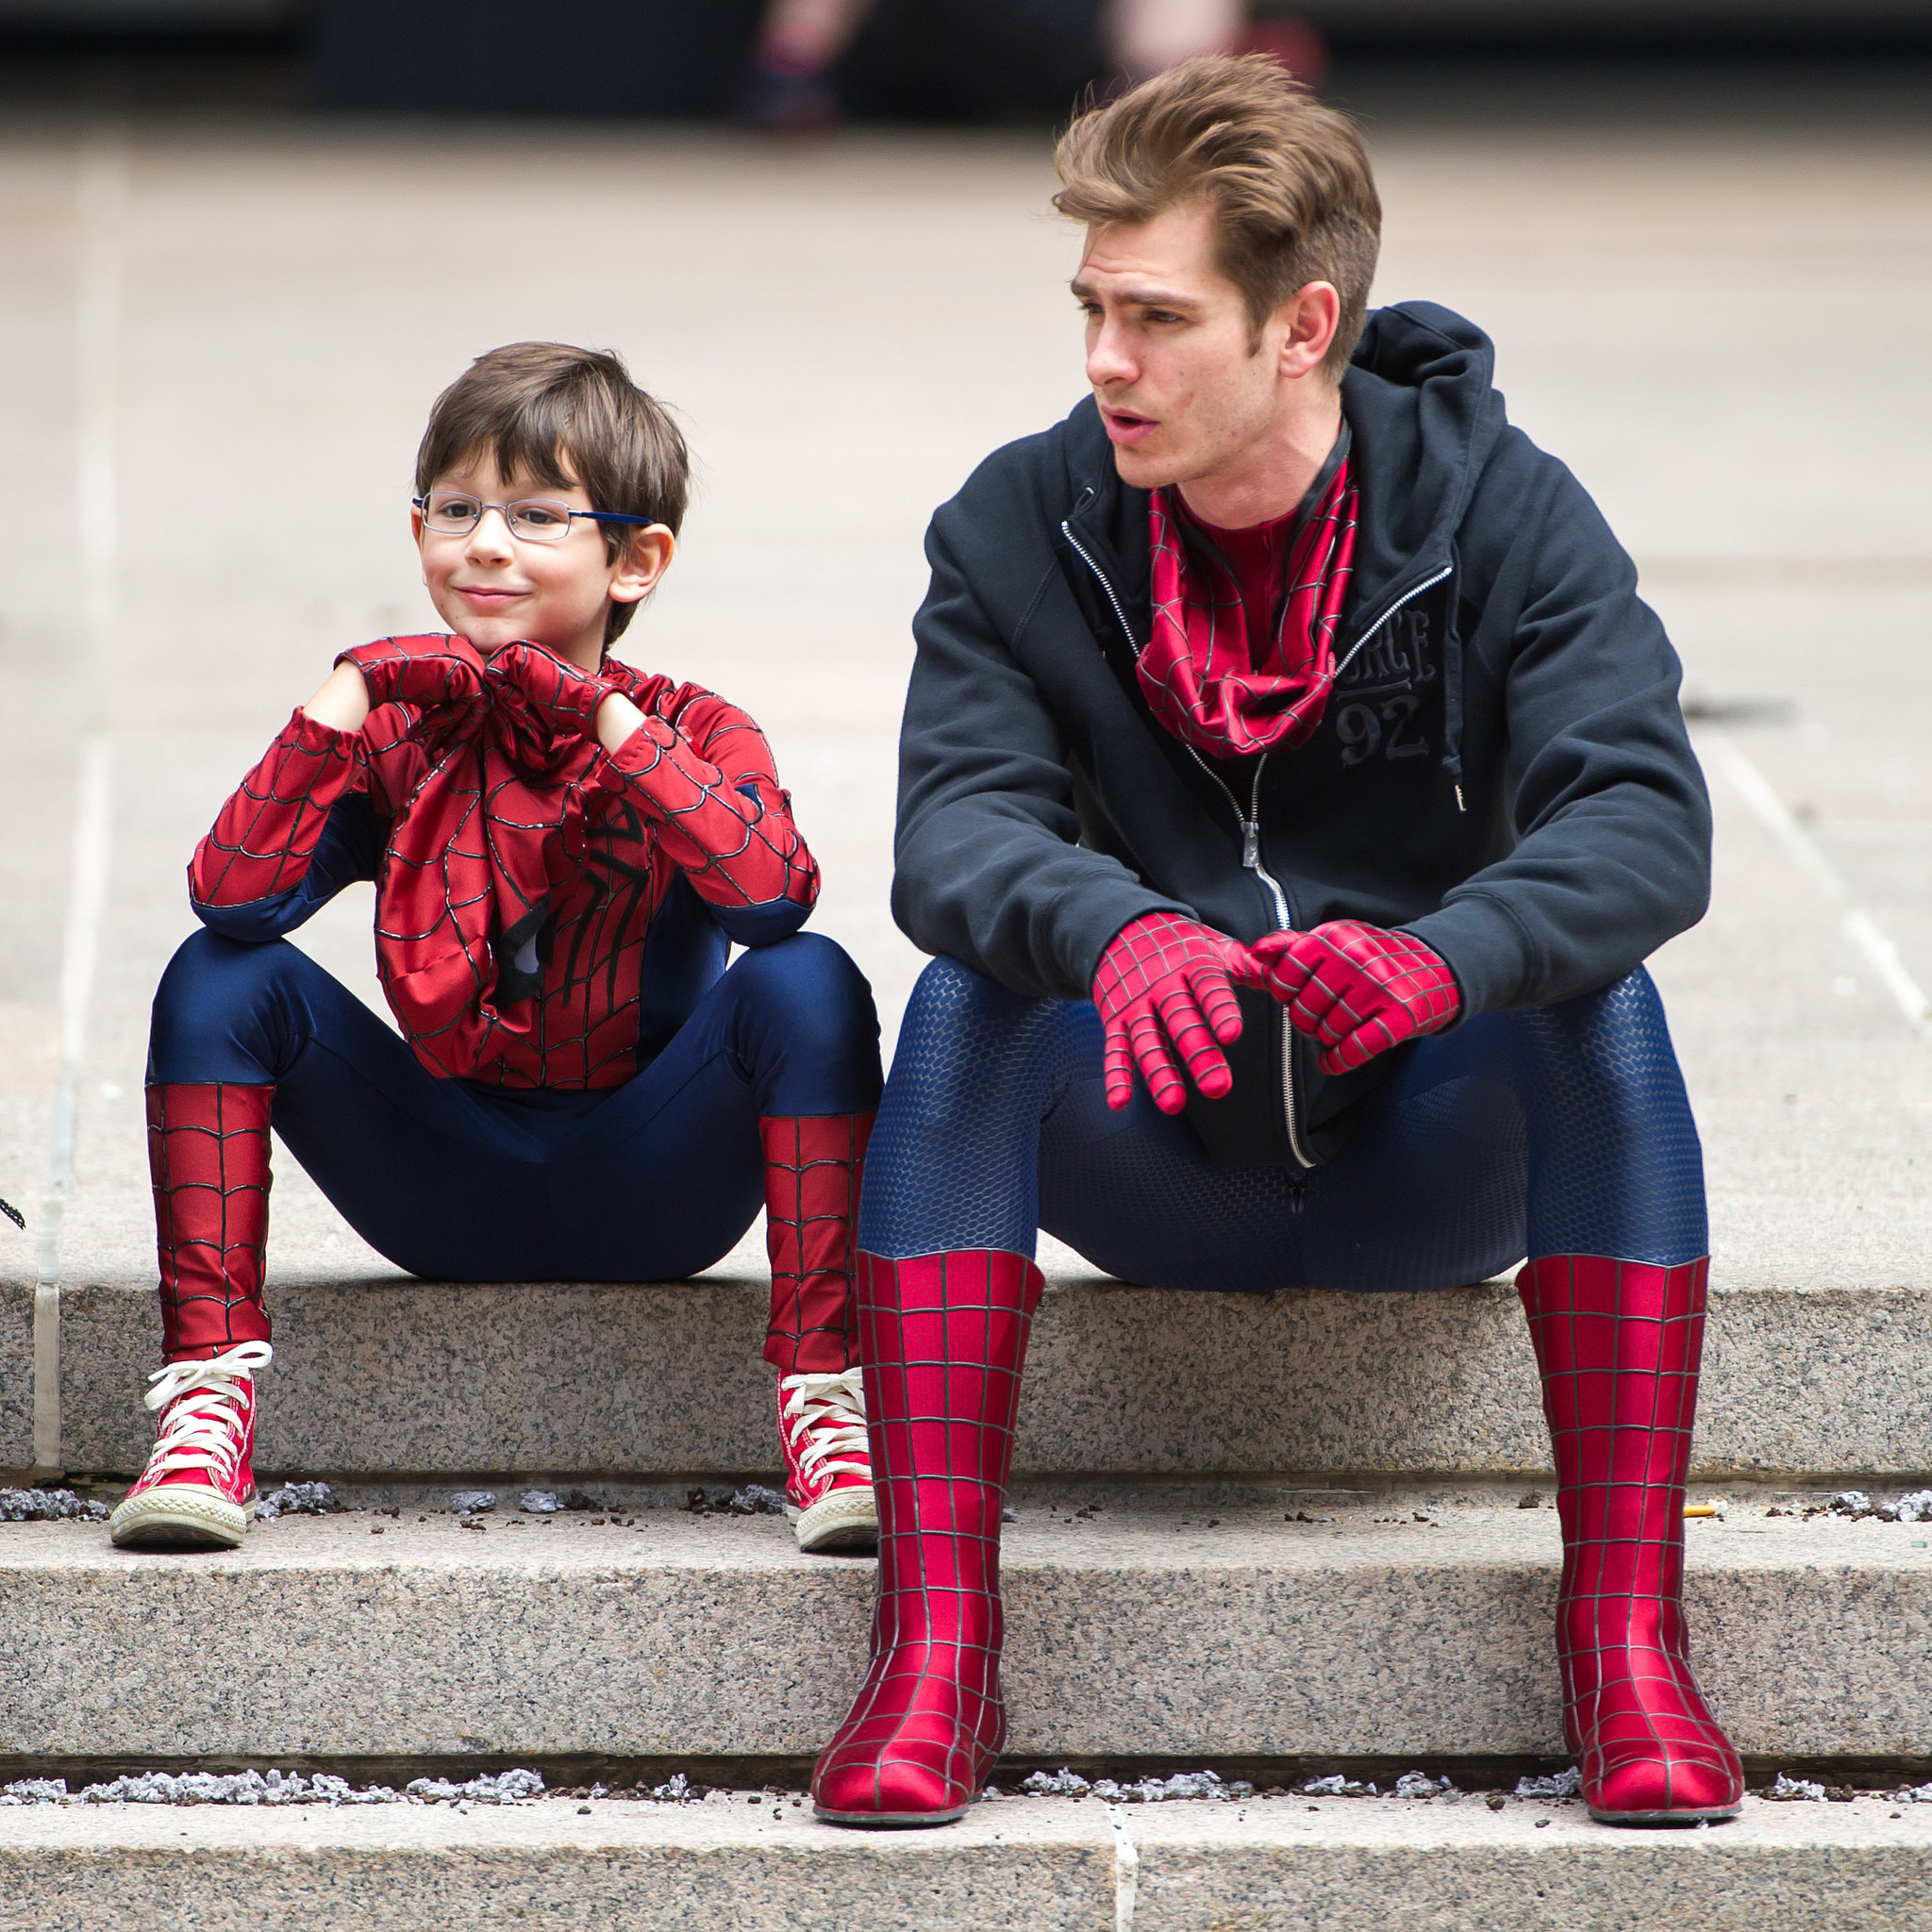 Jorge Vega and Andrew Garfield on the set of The Amazing Spider-Man 2